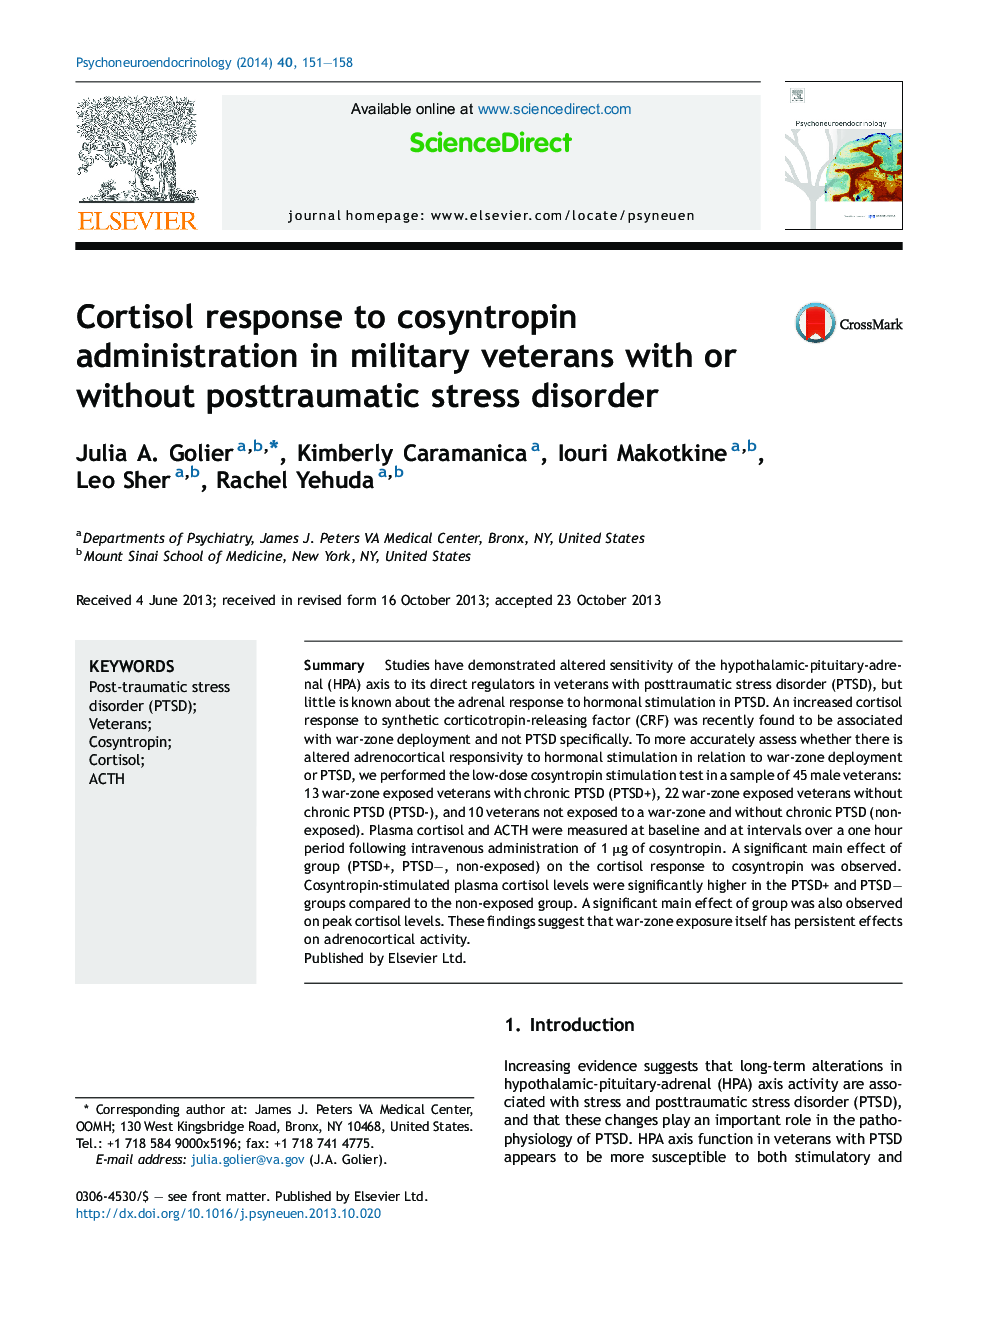 Cortisol response to cosyntropin administration in military veterans with or without posttraumatic stress disorder